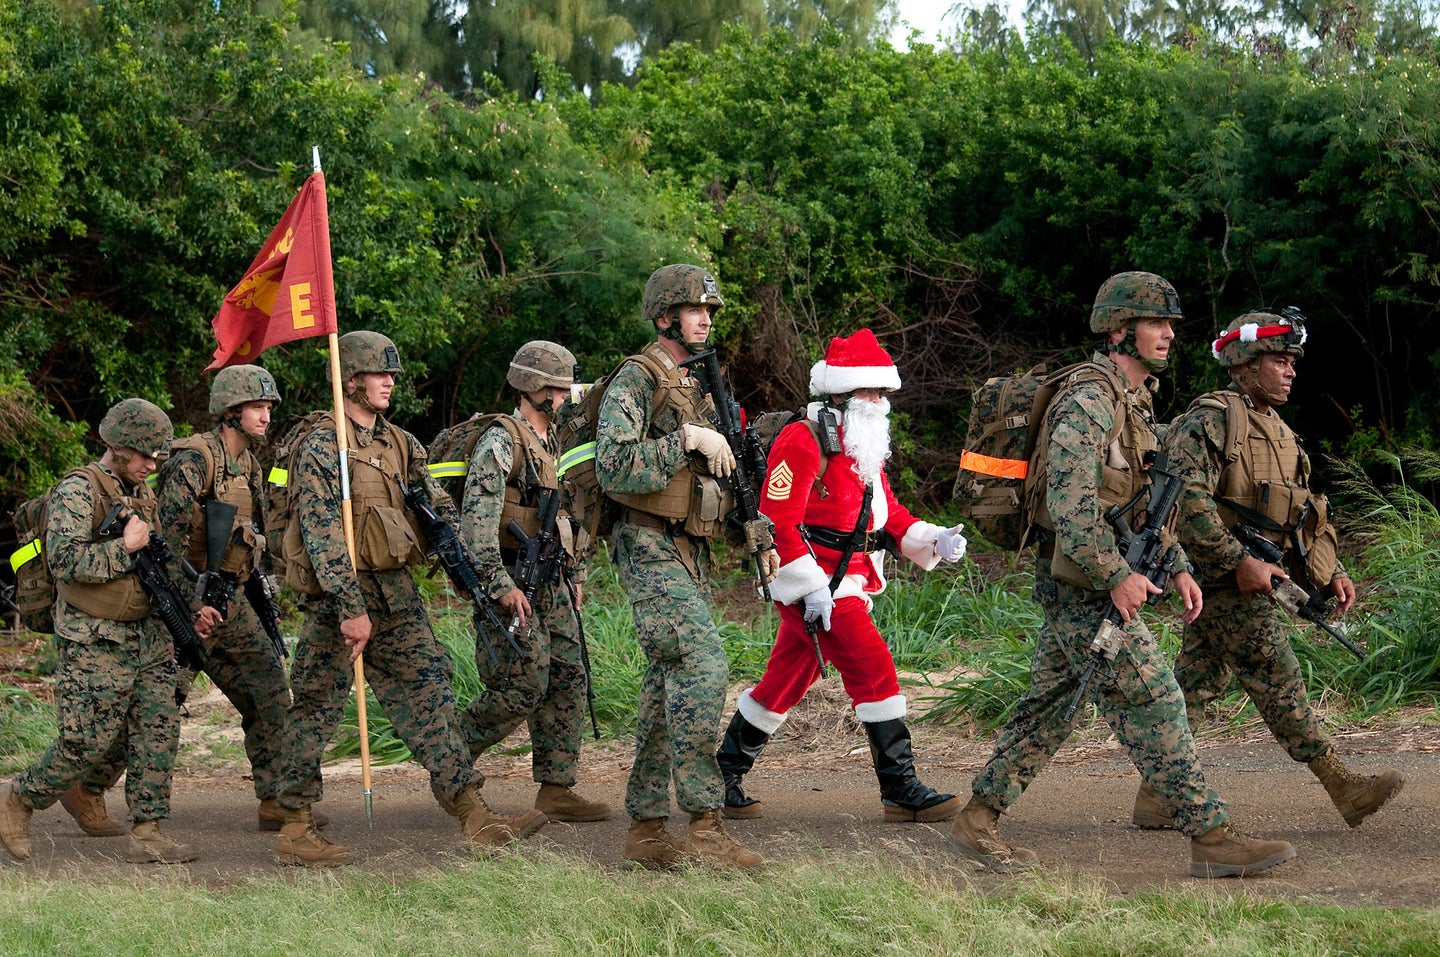 Marines and sailors from 2nd Battalion, 3rd Marine Regiment, enter the Boondocker training area after a 9-mile hike, Dec. 19, 2011.